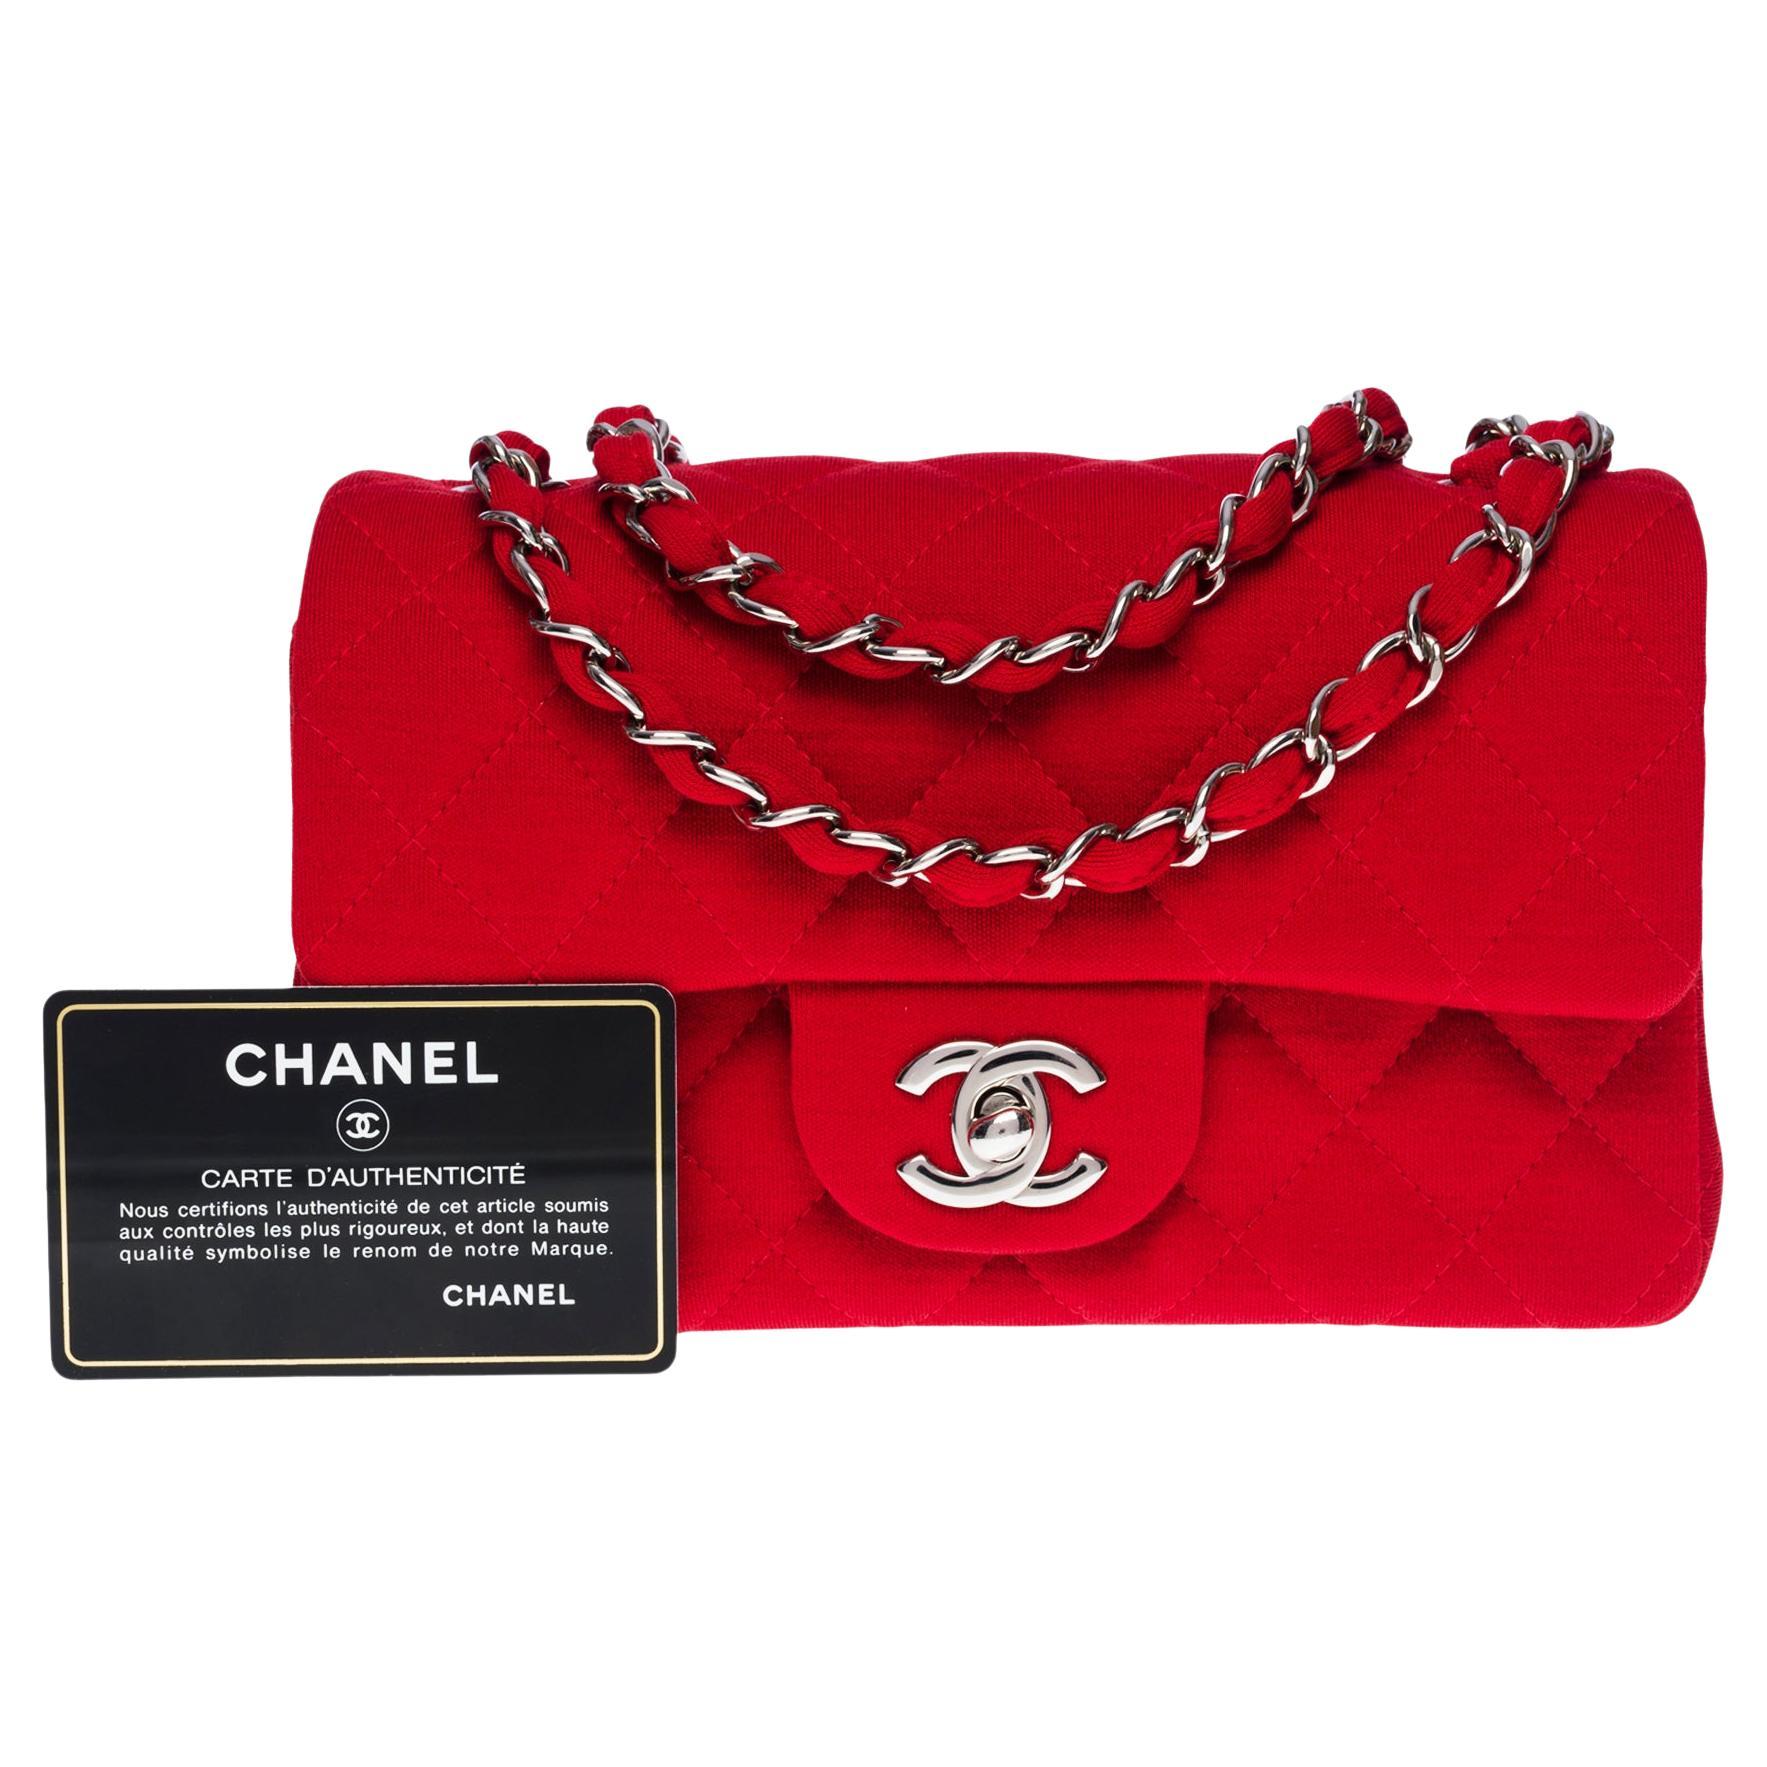 FWRD Renew Chanel Quilted Flap Shoulder Bag in Red